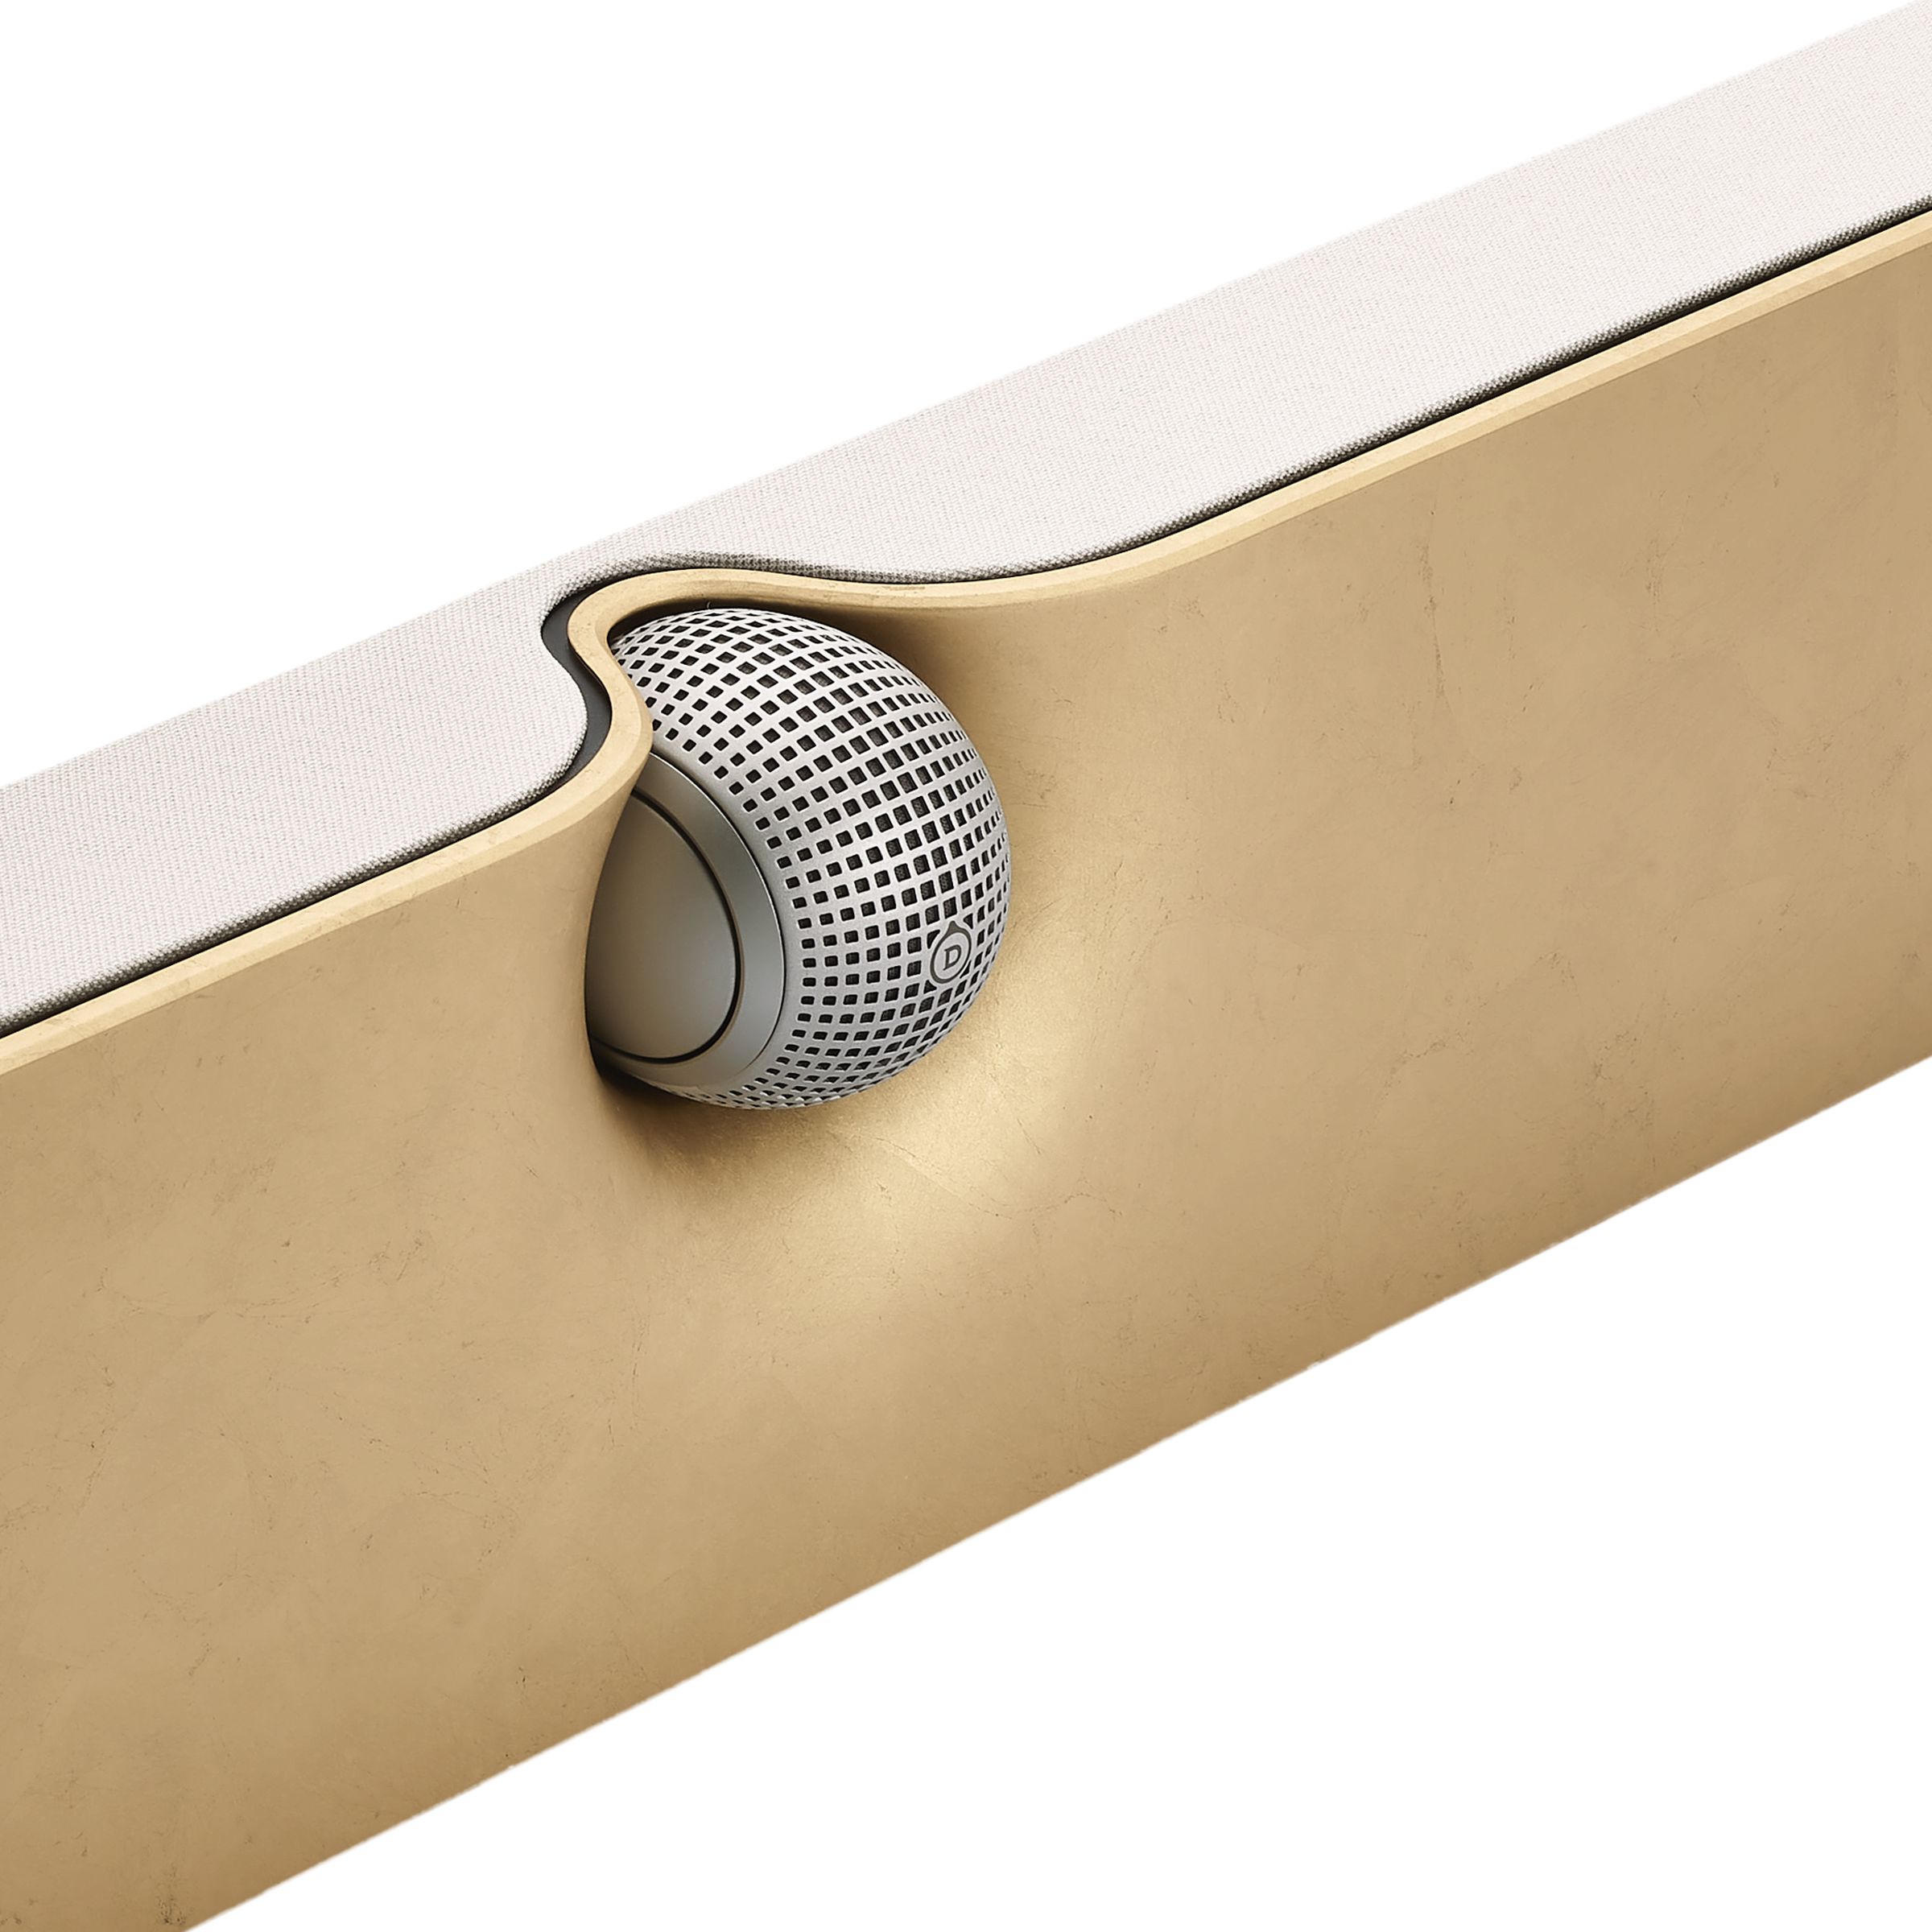 The Dione has a gold top and is oriented as a wall mount with the orb speaker at the top and facing forward.